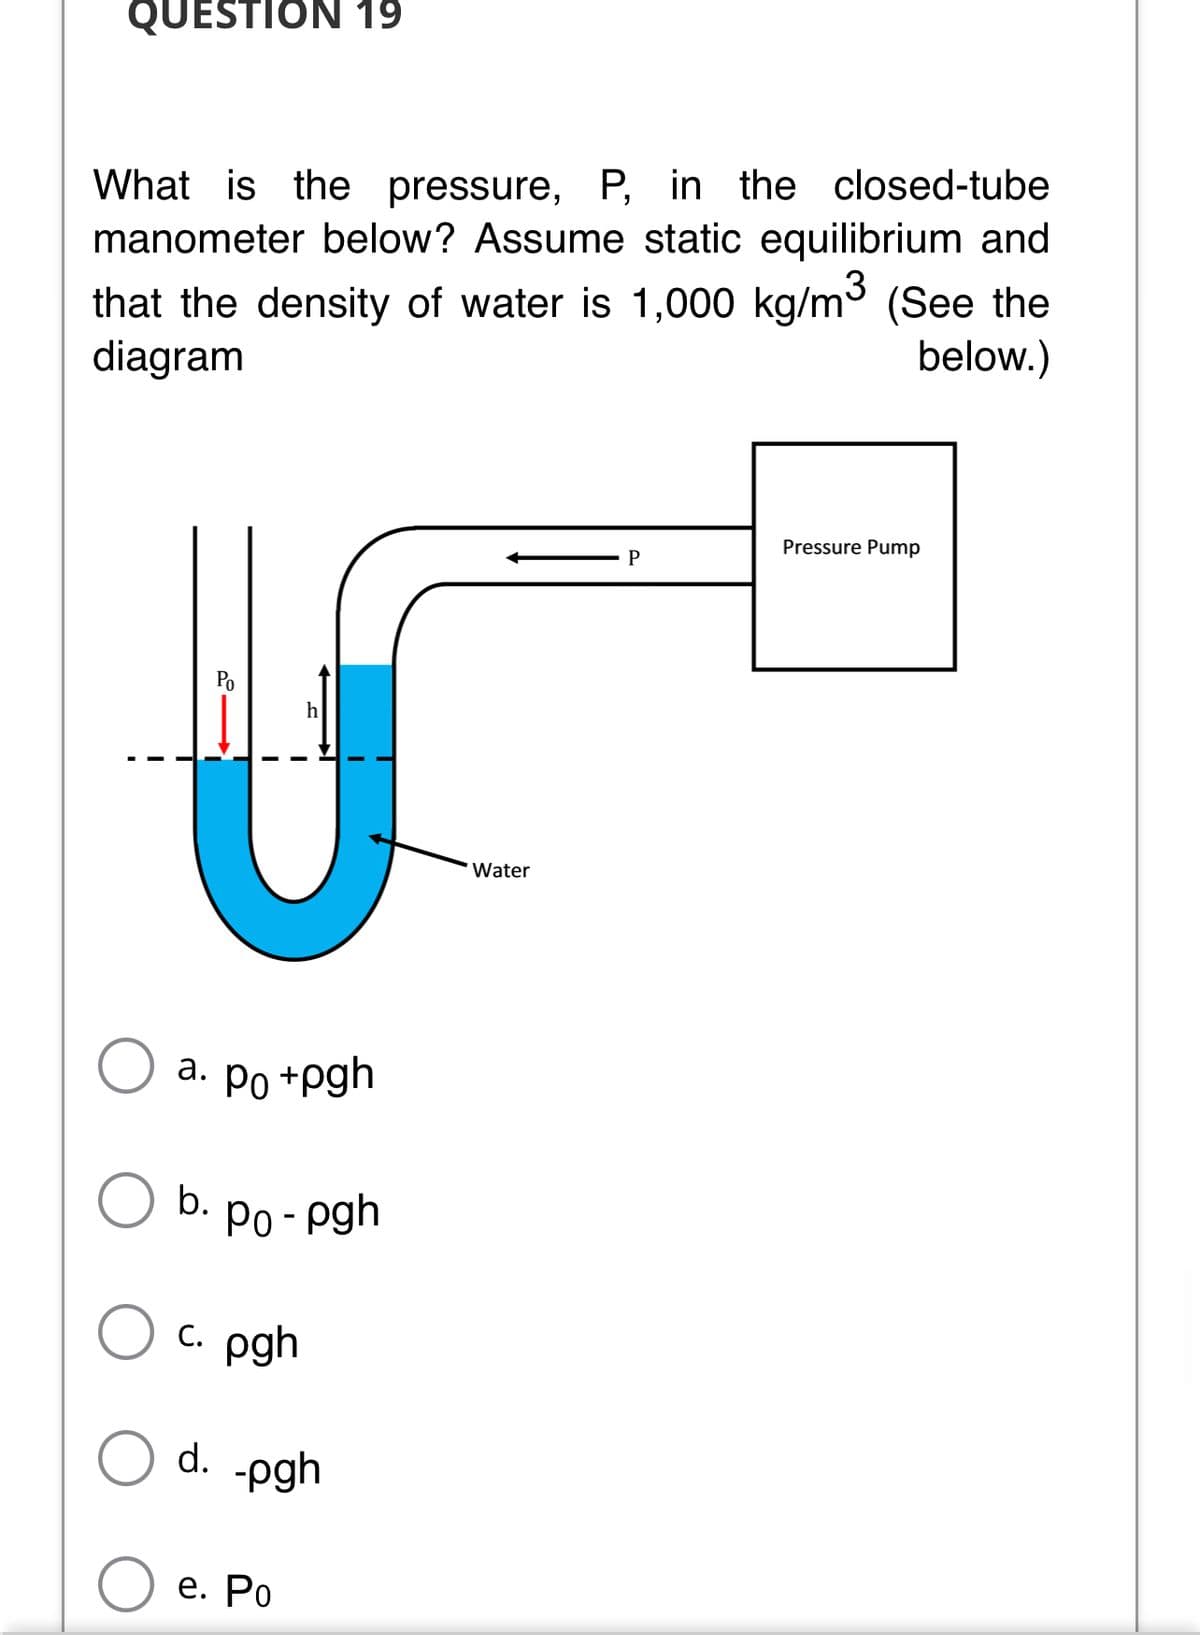 QUESTION 19
What is the pressure, P, in the closed-tube
manometer below? Assume static equilibrium and
that the density of water is 1,000 kg/m3 (See the
diagram
below.)
Pressure Pump
Po
Water
a. Po +pgh
b.
Po - pgh
с. pgh
d.
-pgh
е. Ро
